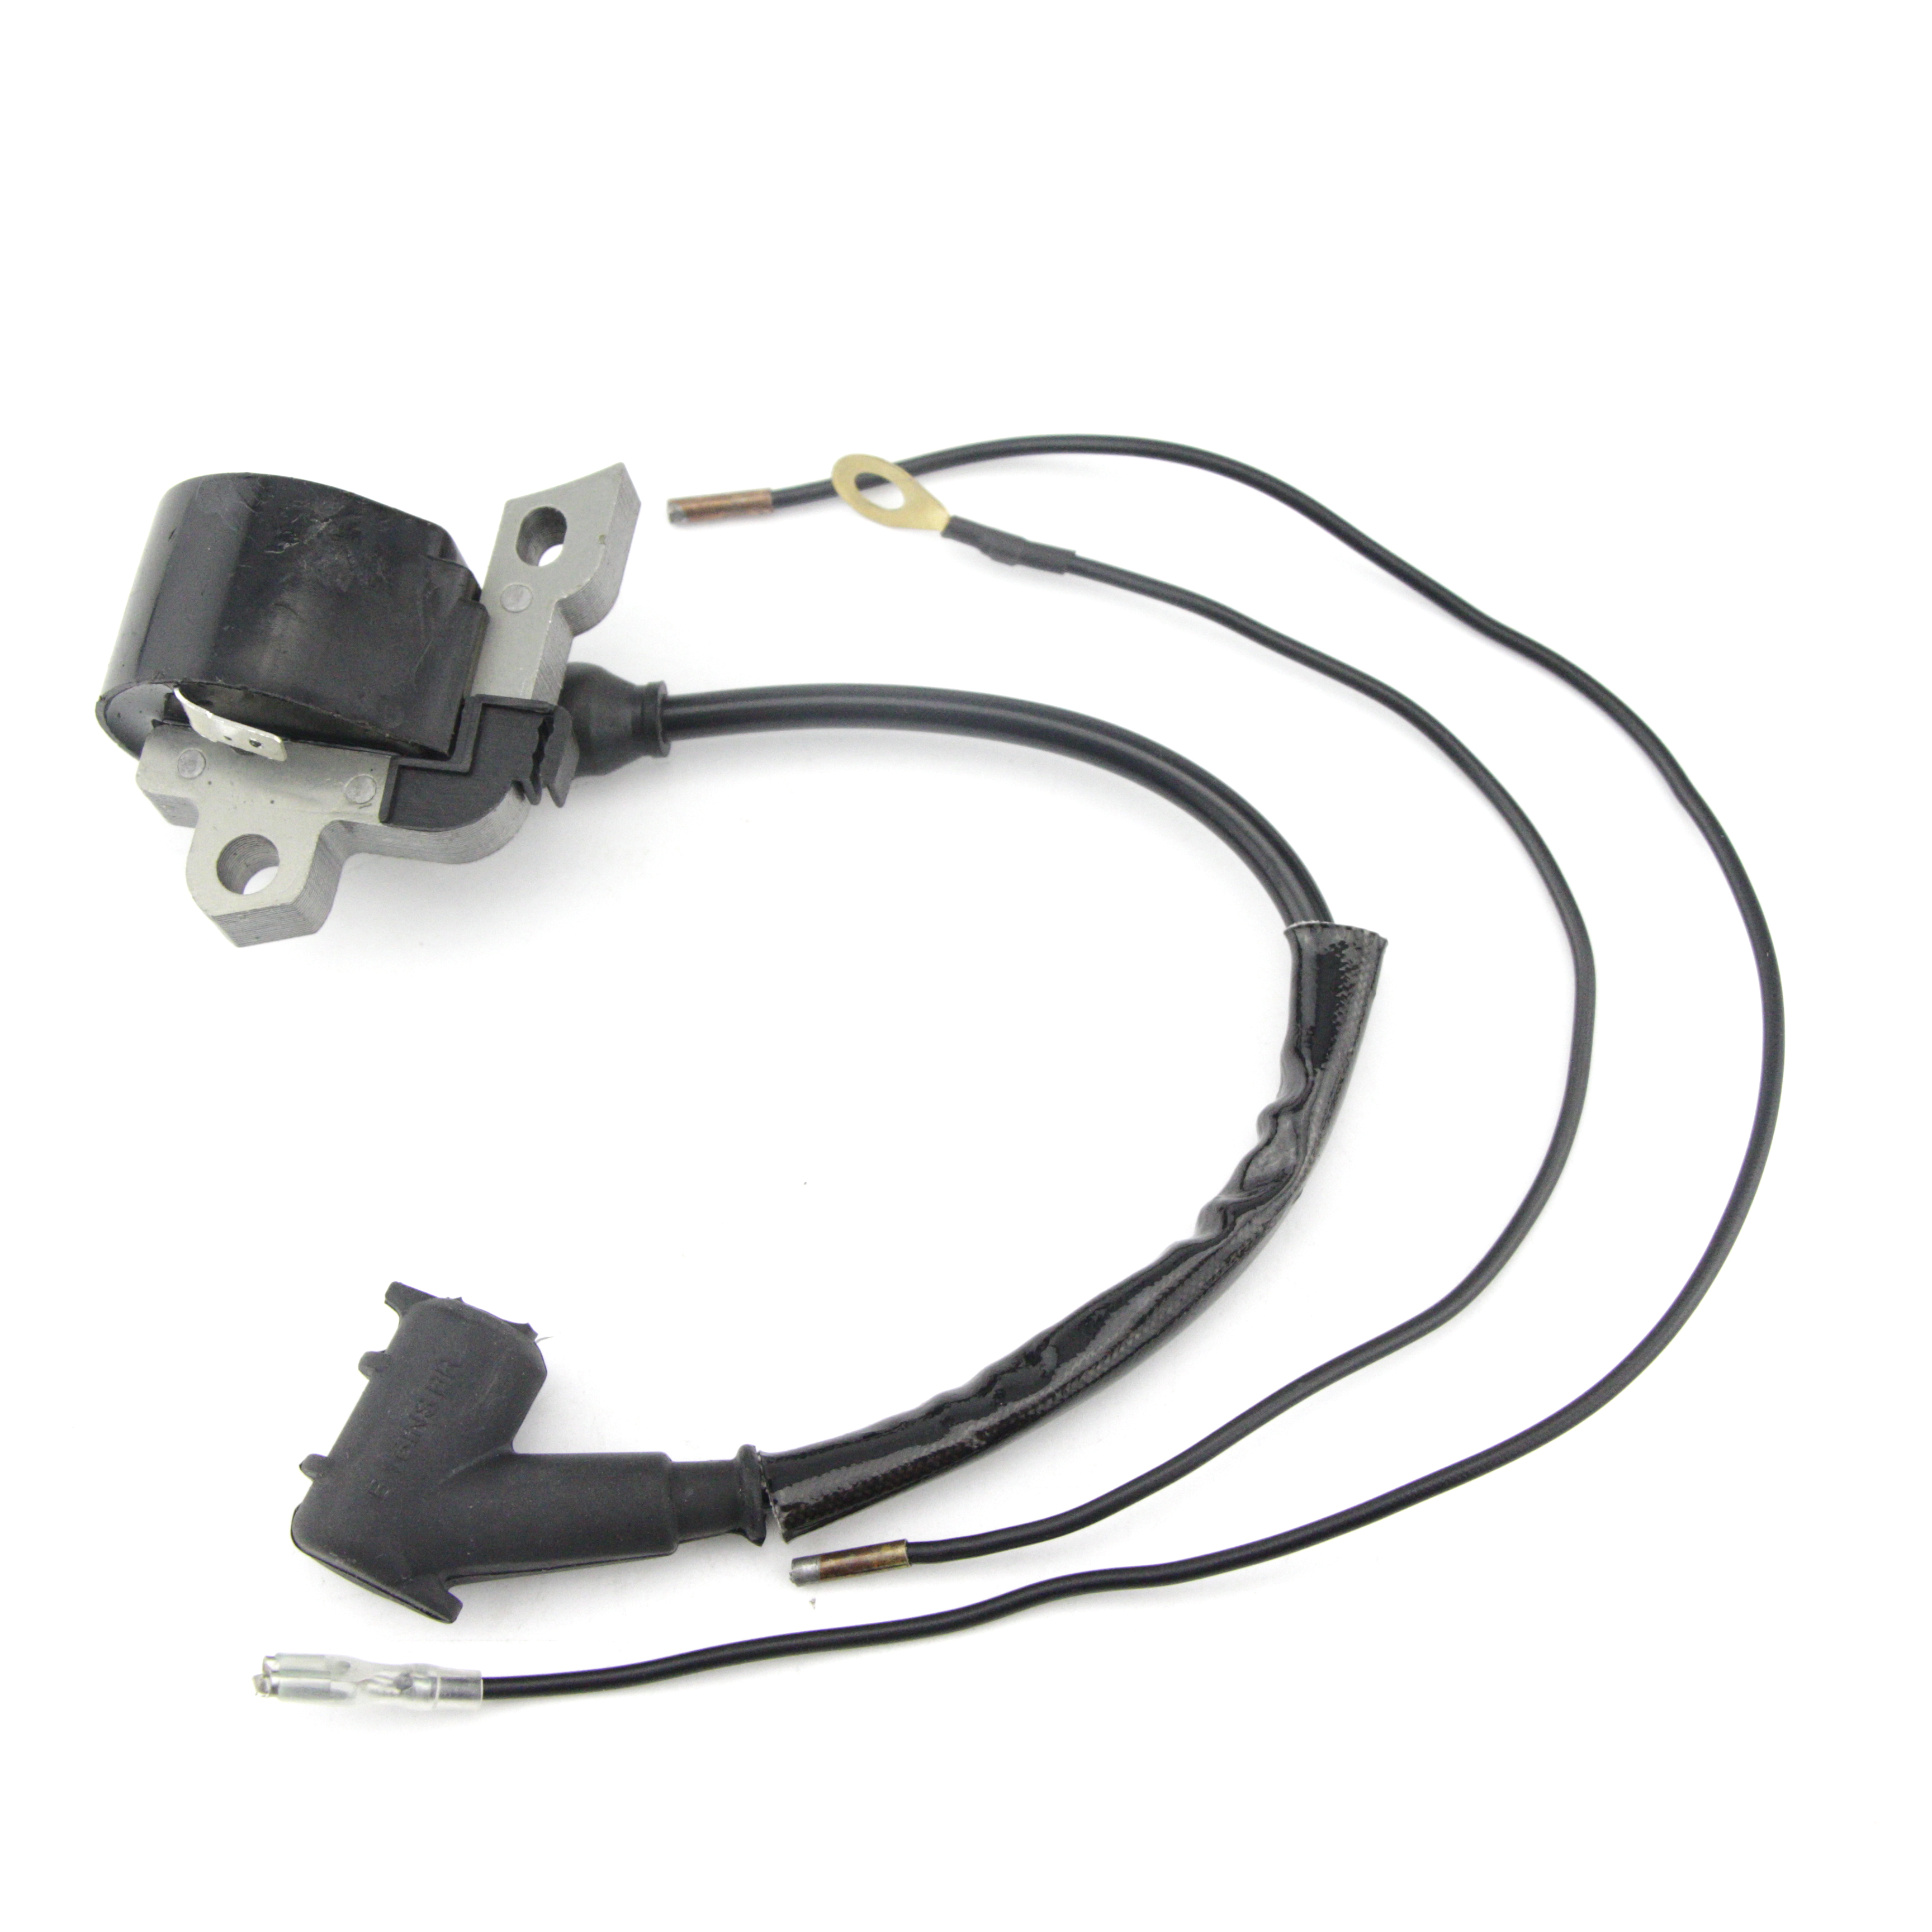 Ignition Coil For STIHL 024 026 029 034 036 039 044 046 064 MS440 0000-400-1300